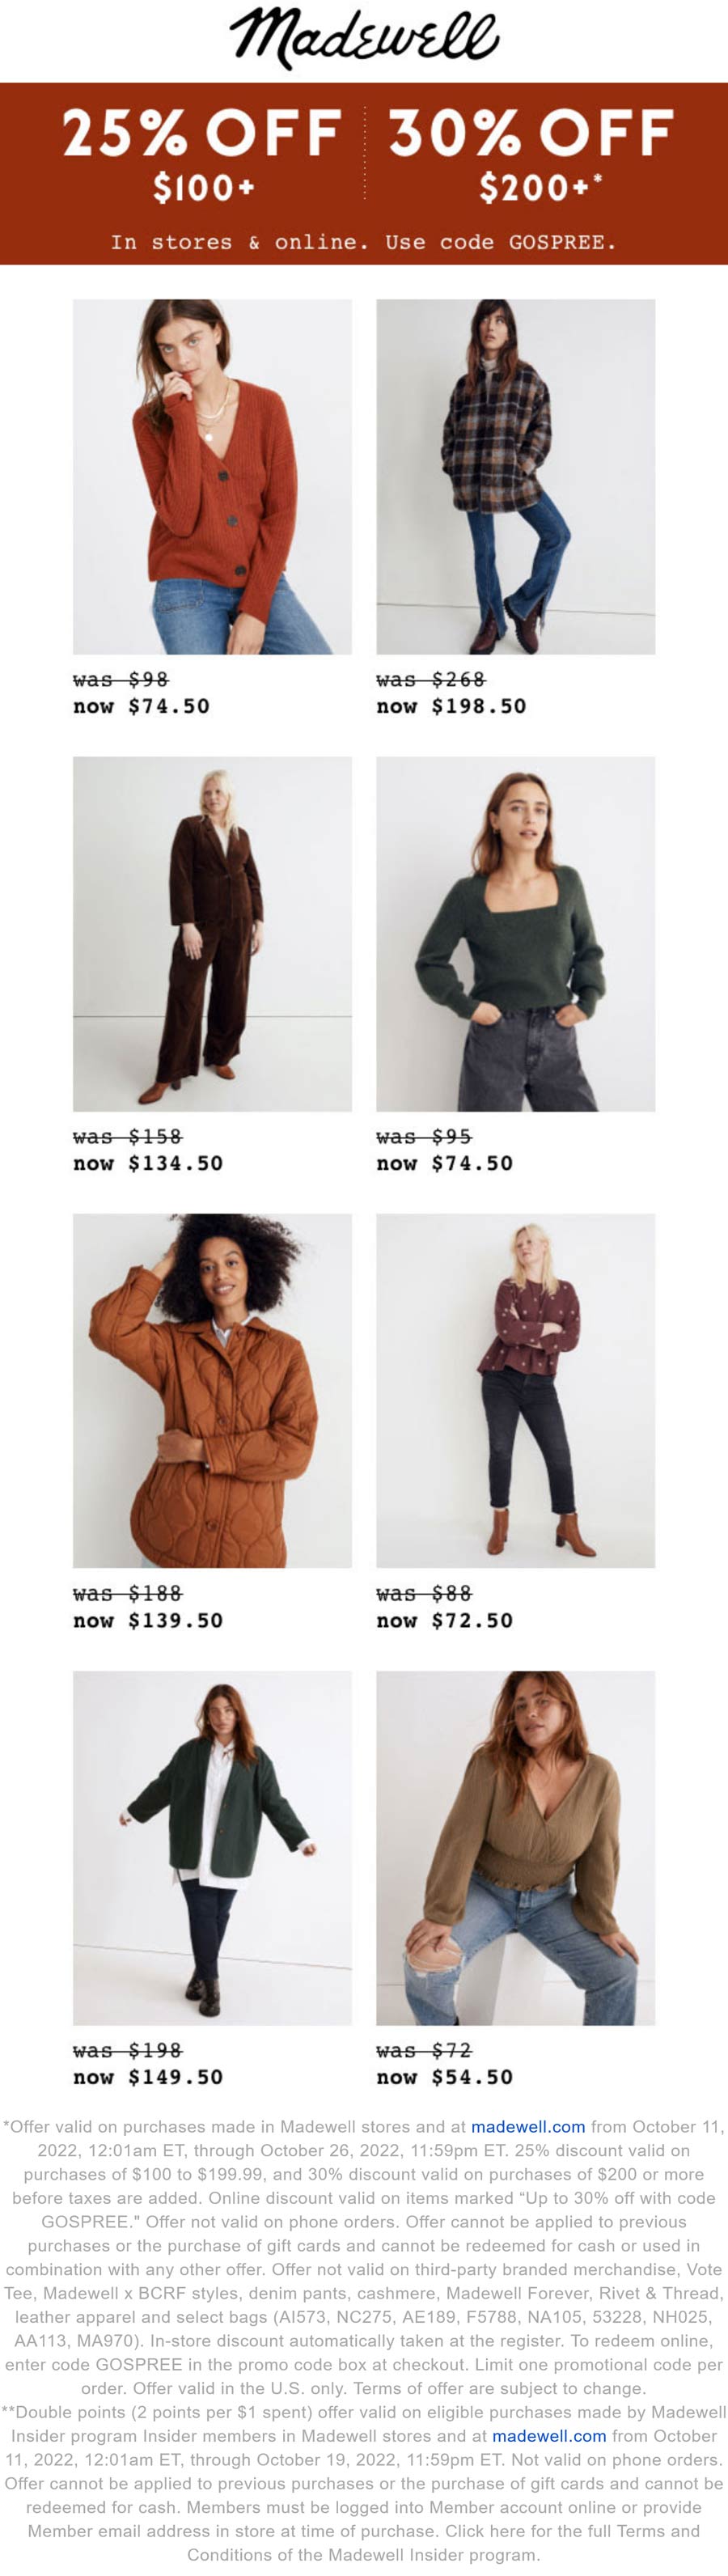 Madewell coupons & promo code for [November 2022]